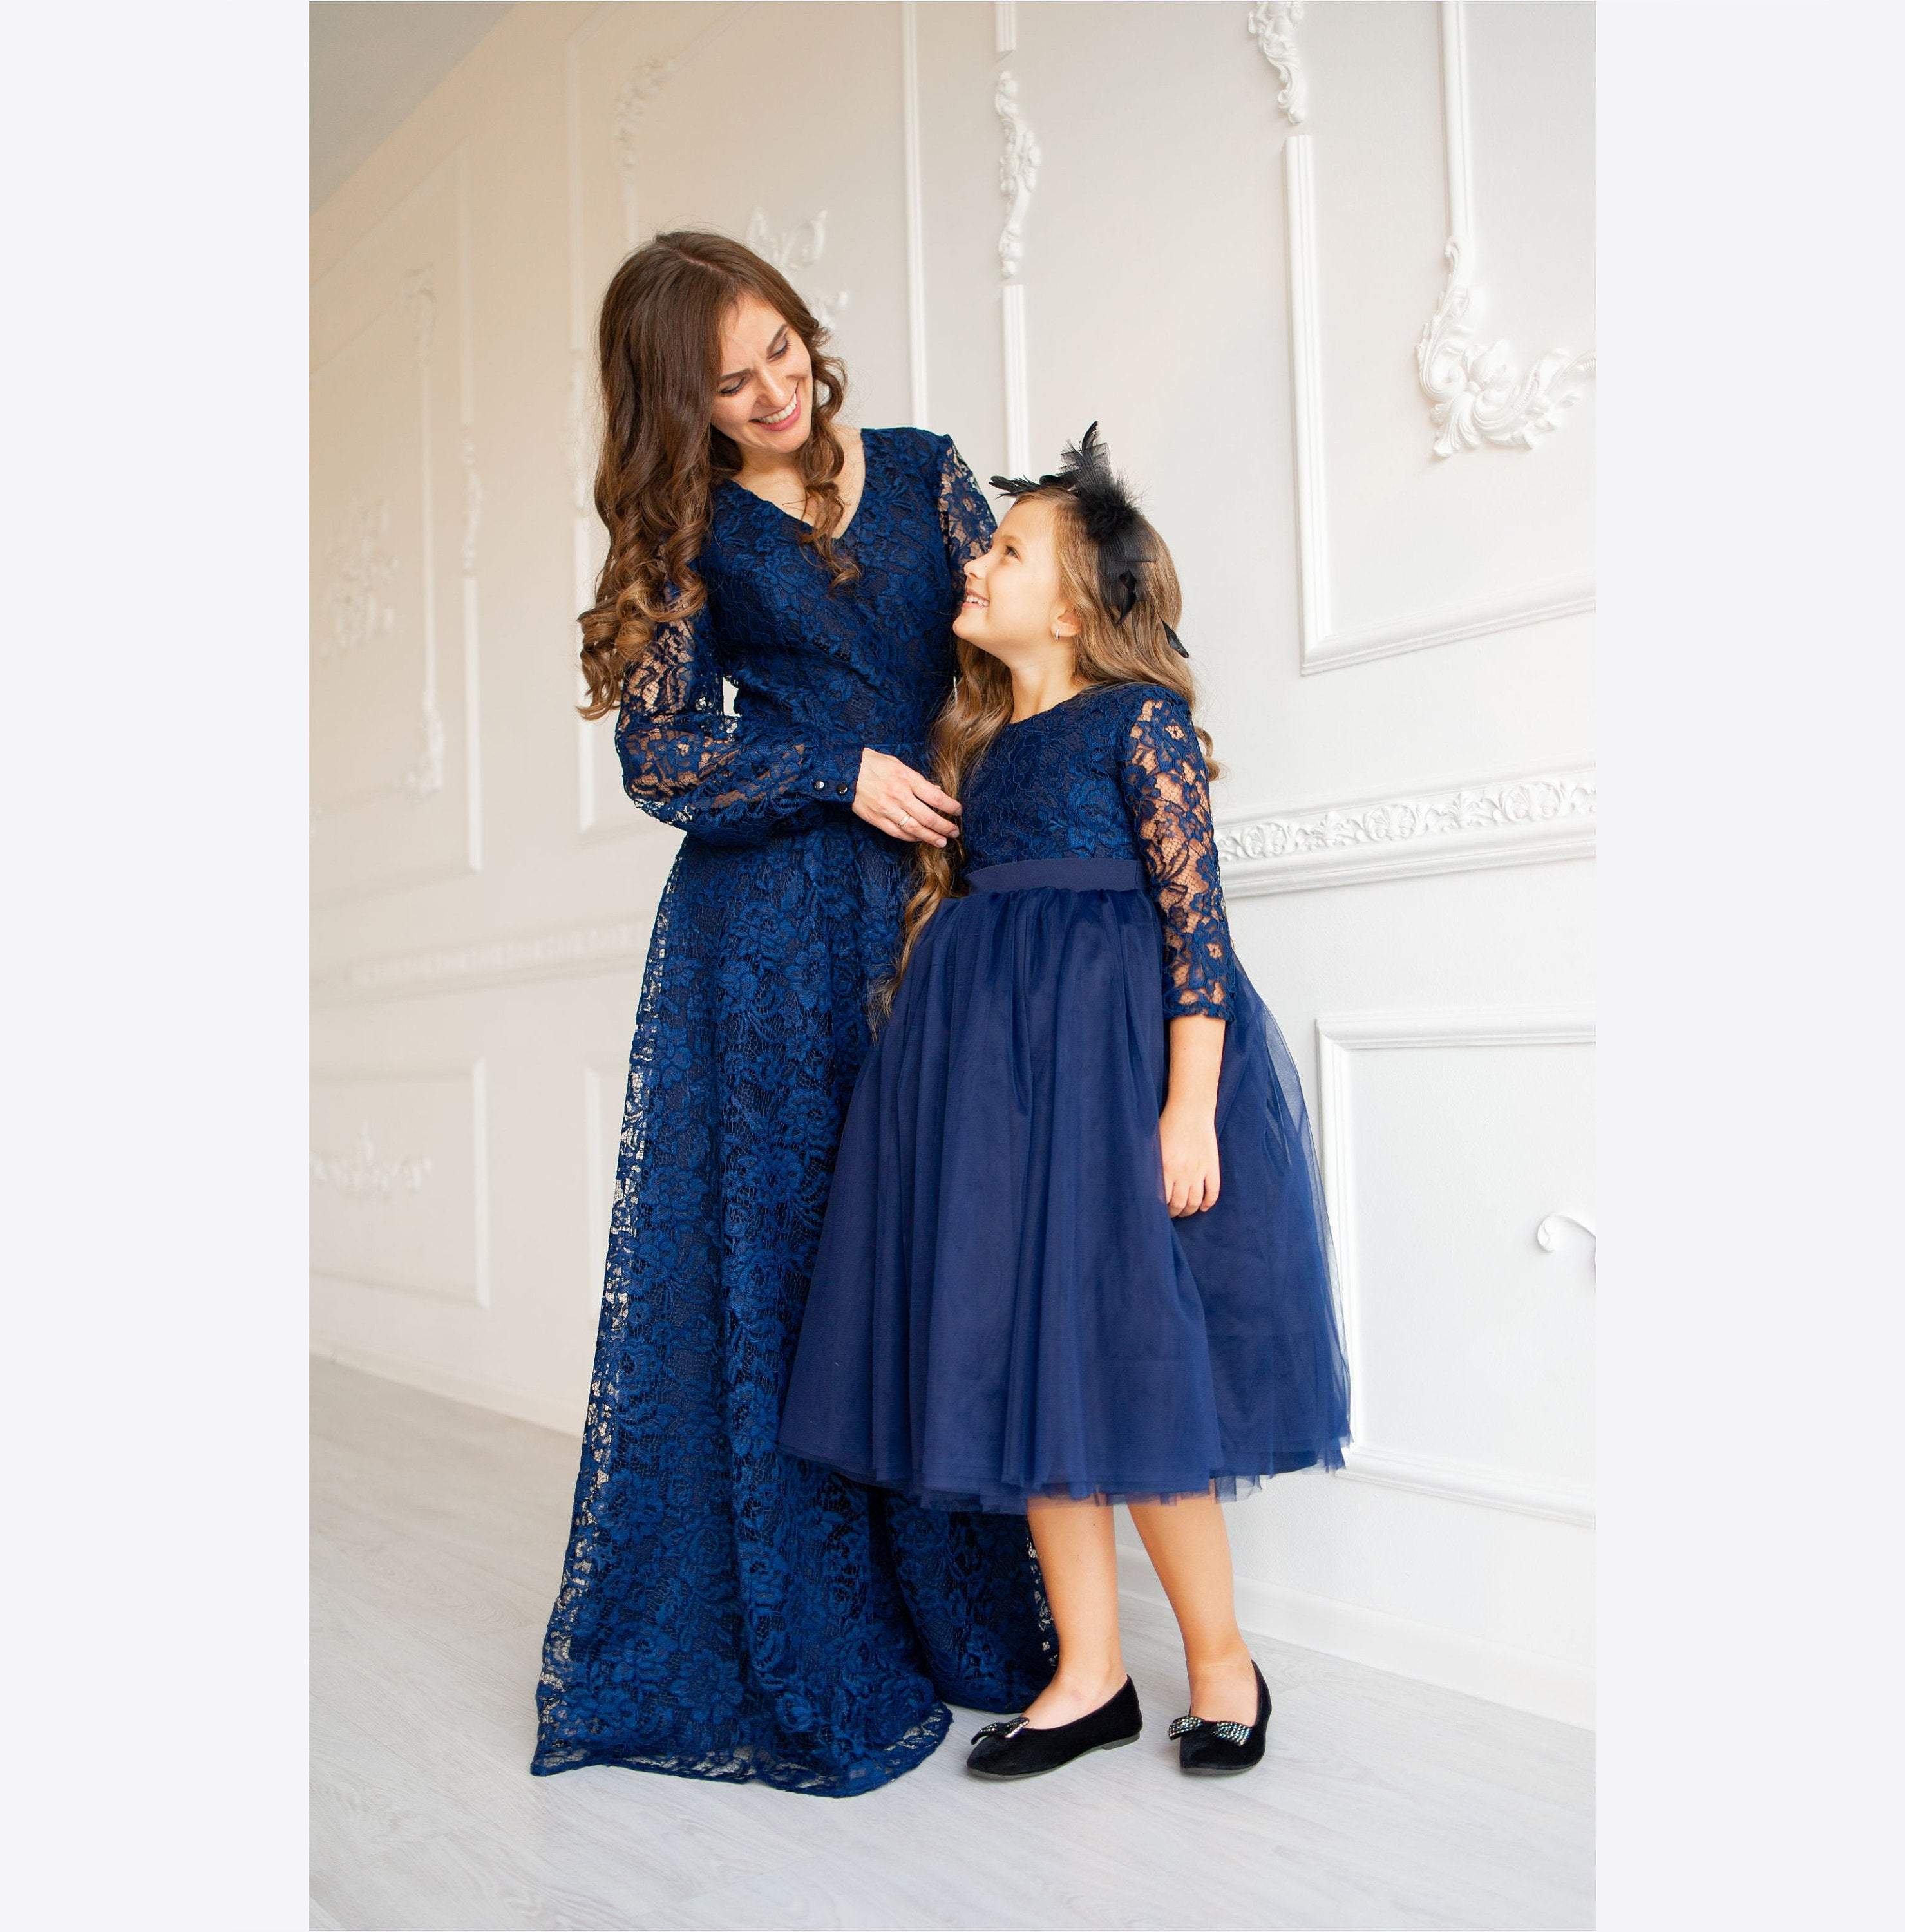 Mom Daughter Matching Outfits Dress | Mother Daughter Matching Dresses -  New Mother - Aliexpress